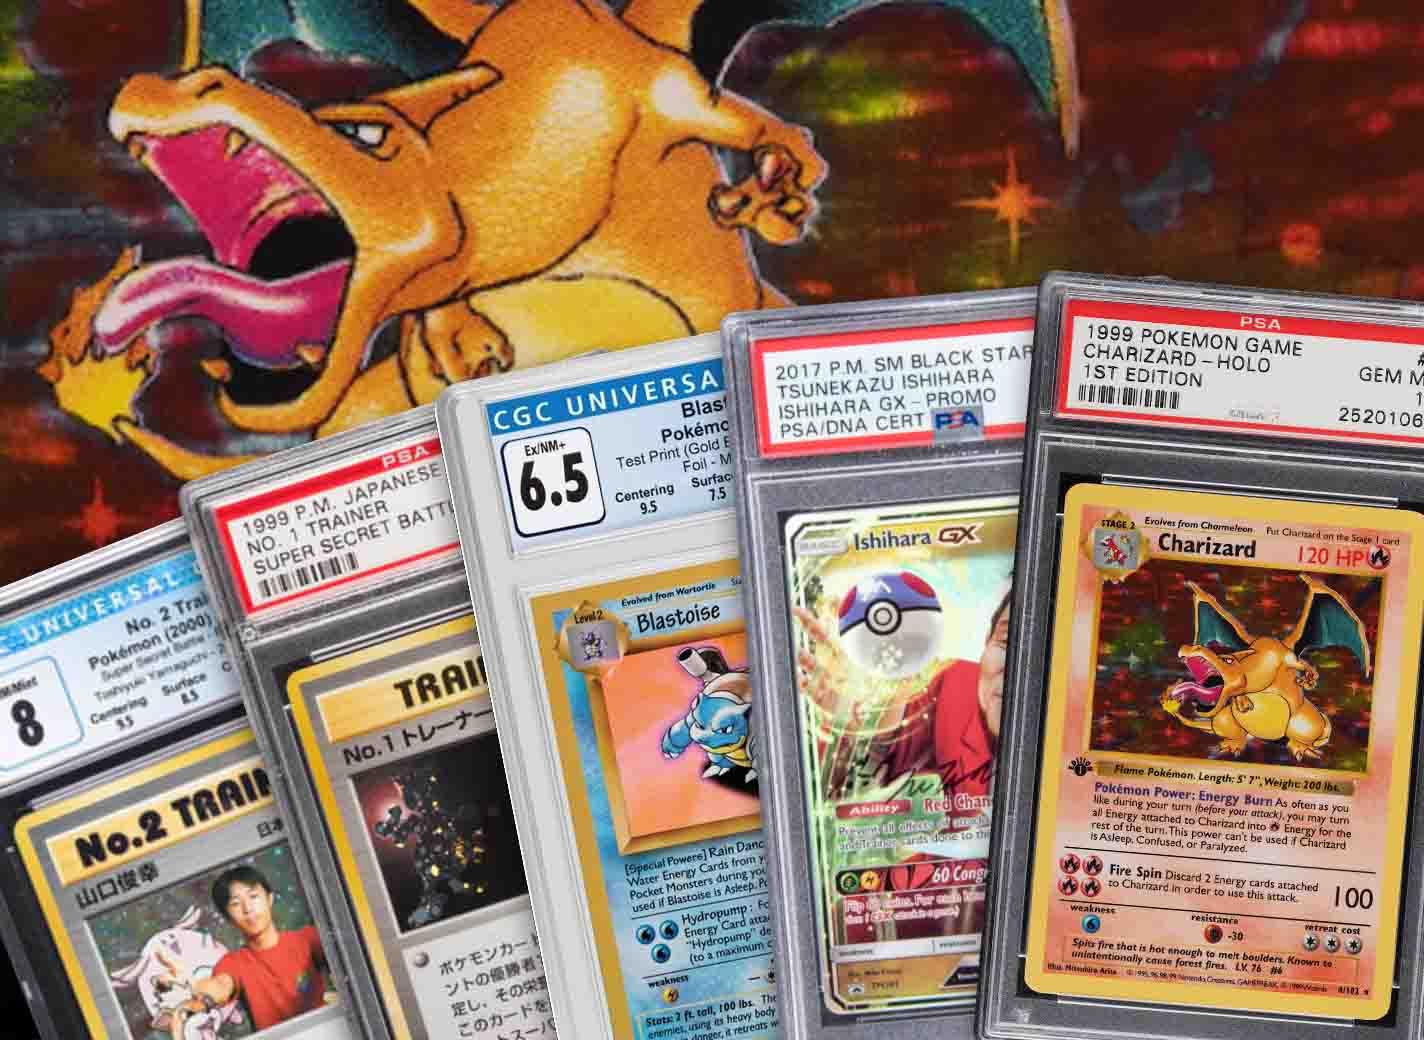 An Unopened First Edition Set of Pokémon Cards, Deemed 'the